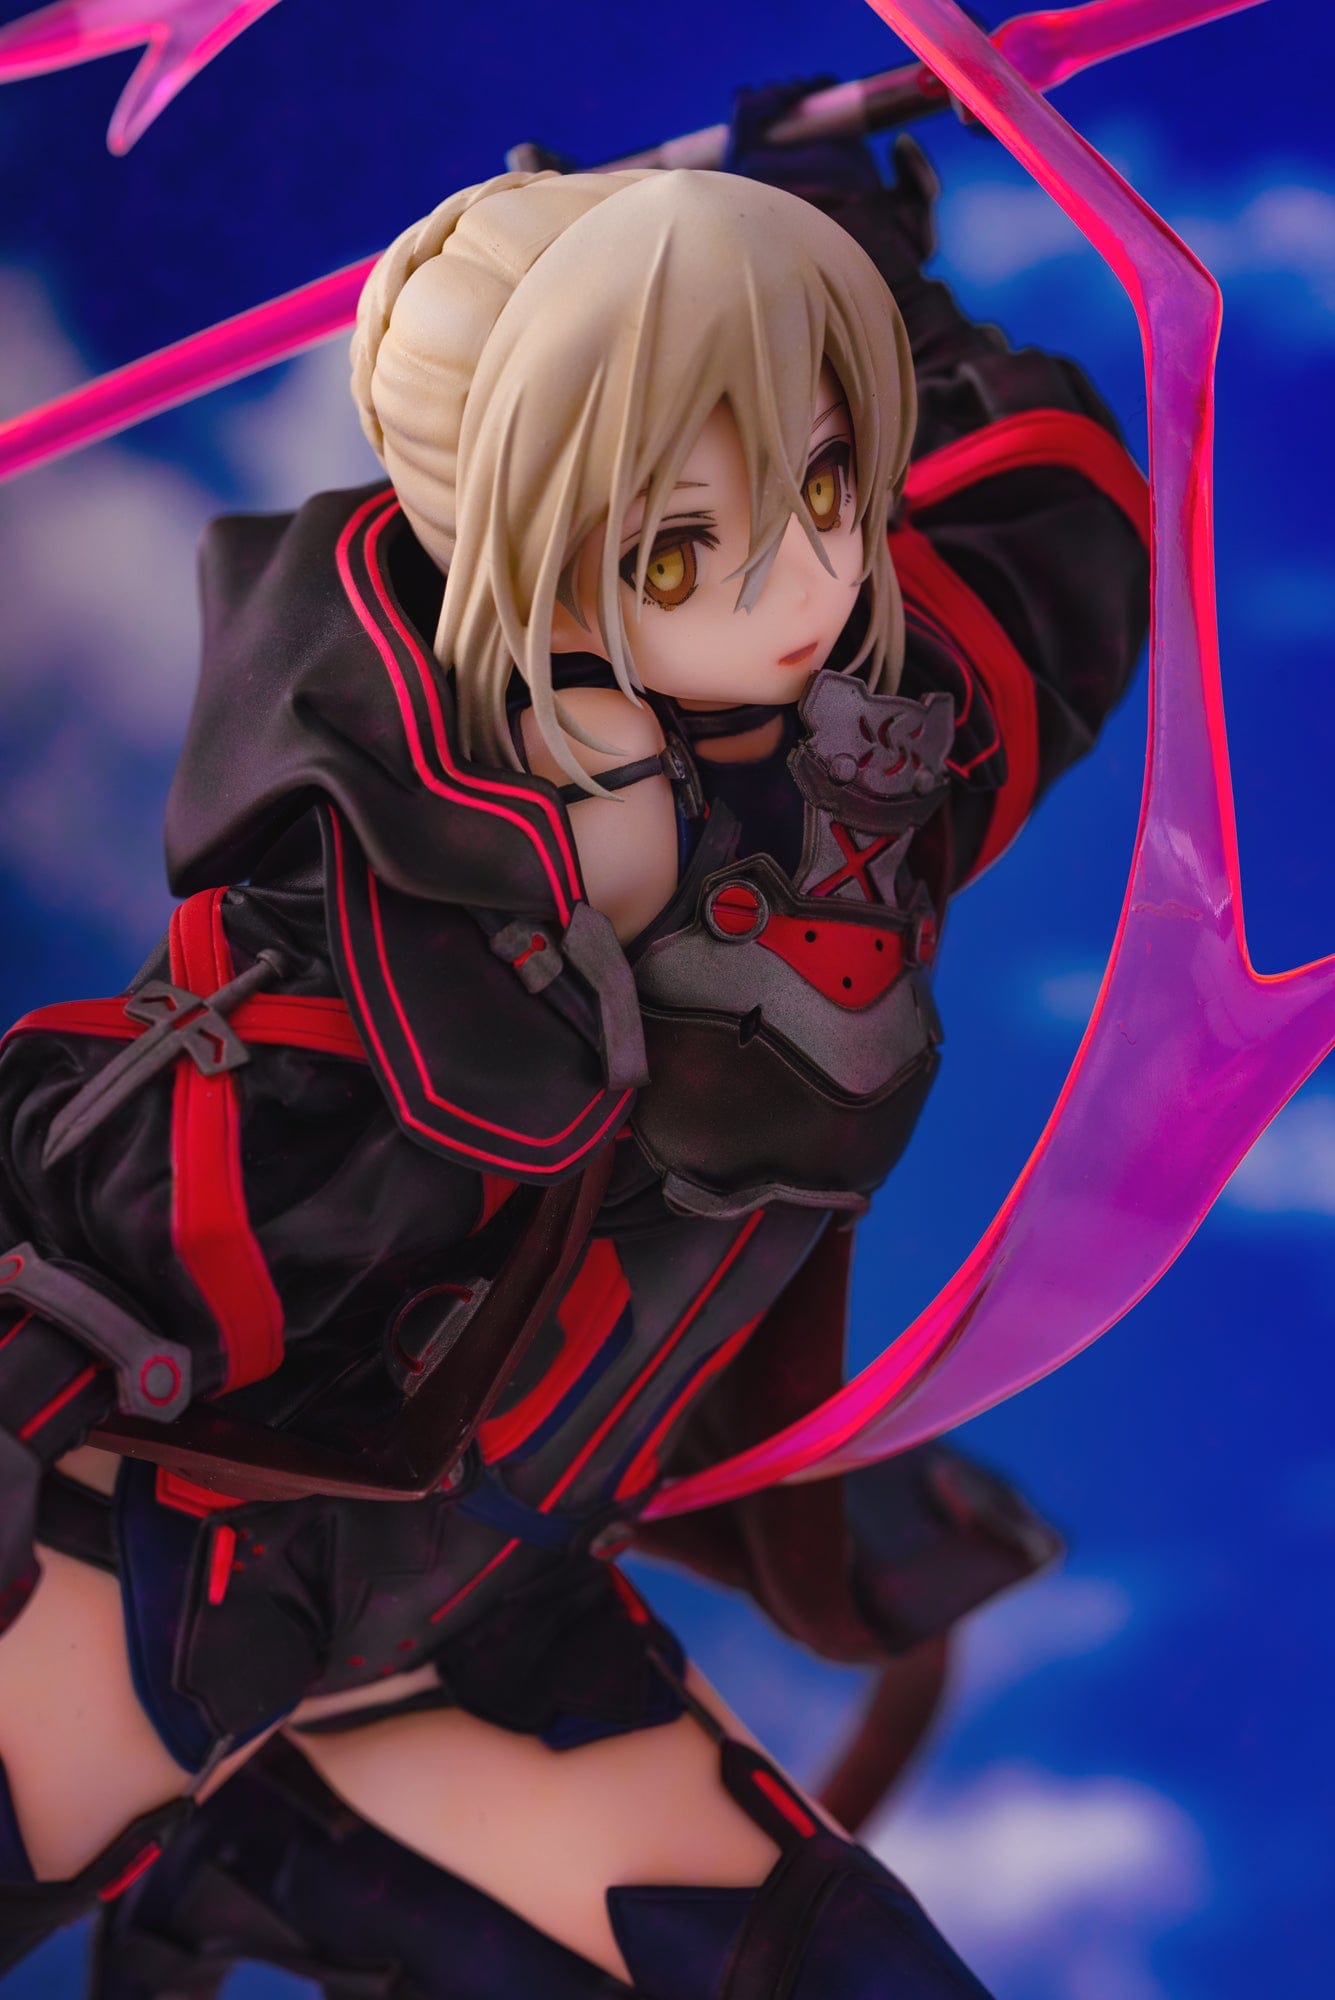 Aoshima Fate/Grand Order 1/7th Scale Mysterious Heroine X Alter